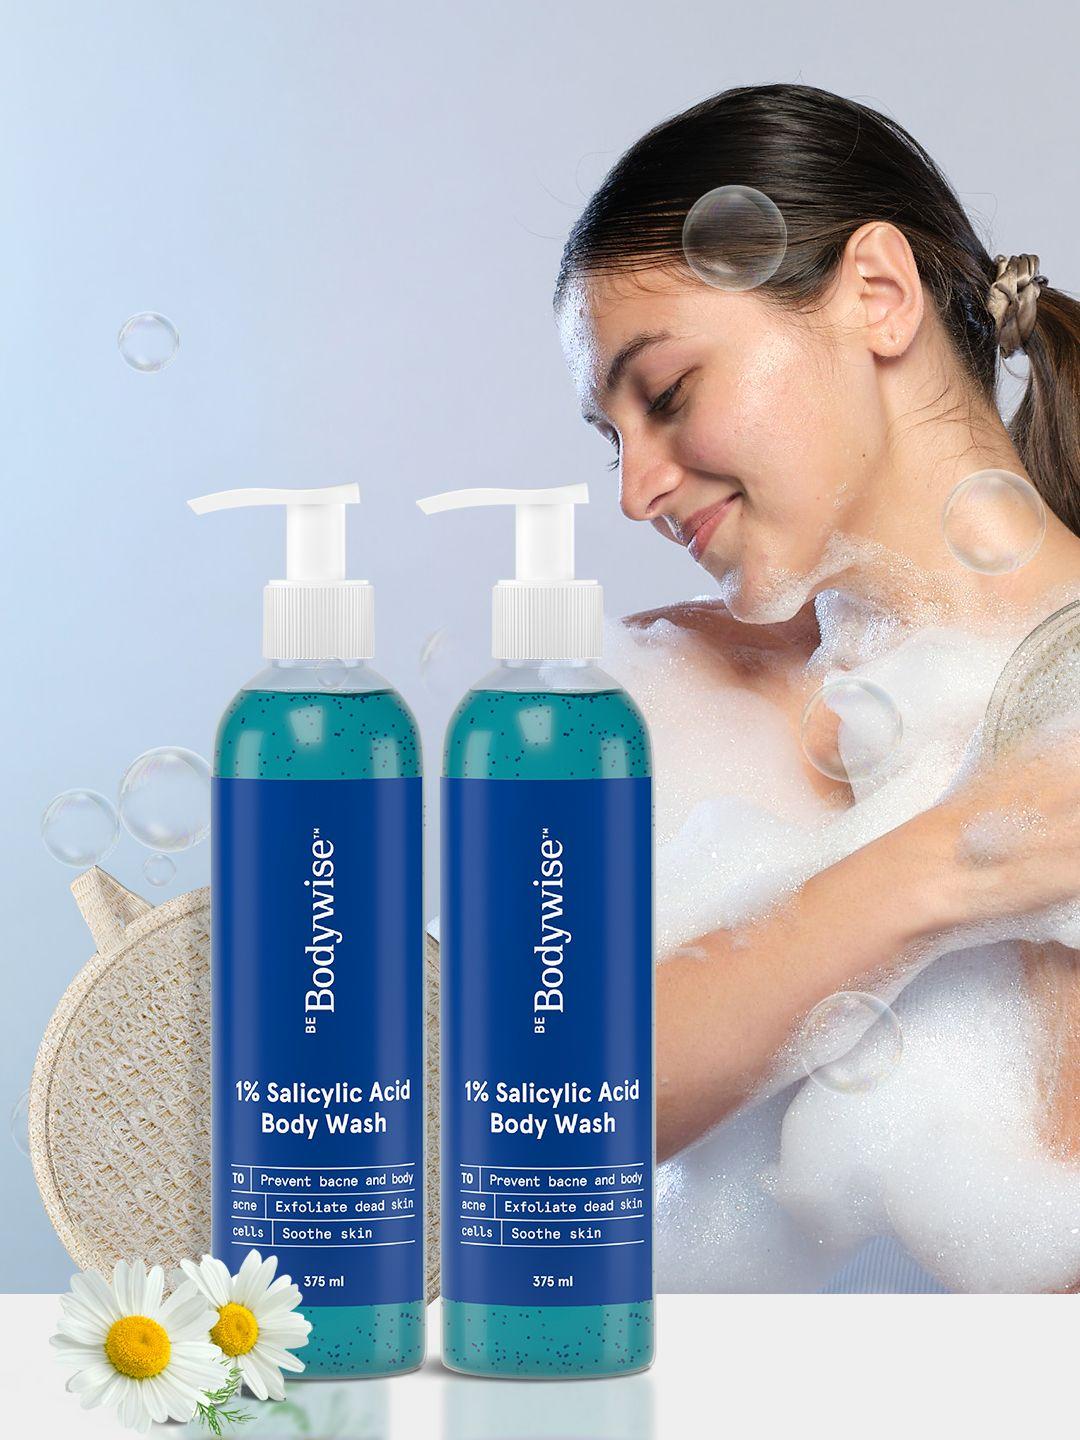 be bodywise set of 2 salicylic acid body wash 375ml each with free loofah to prevent bacne